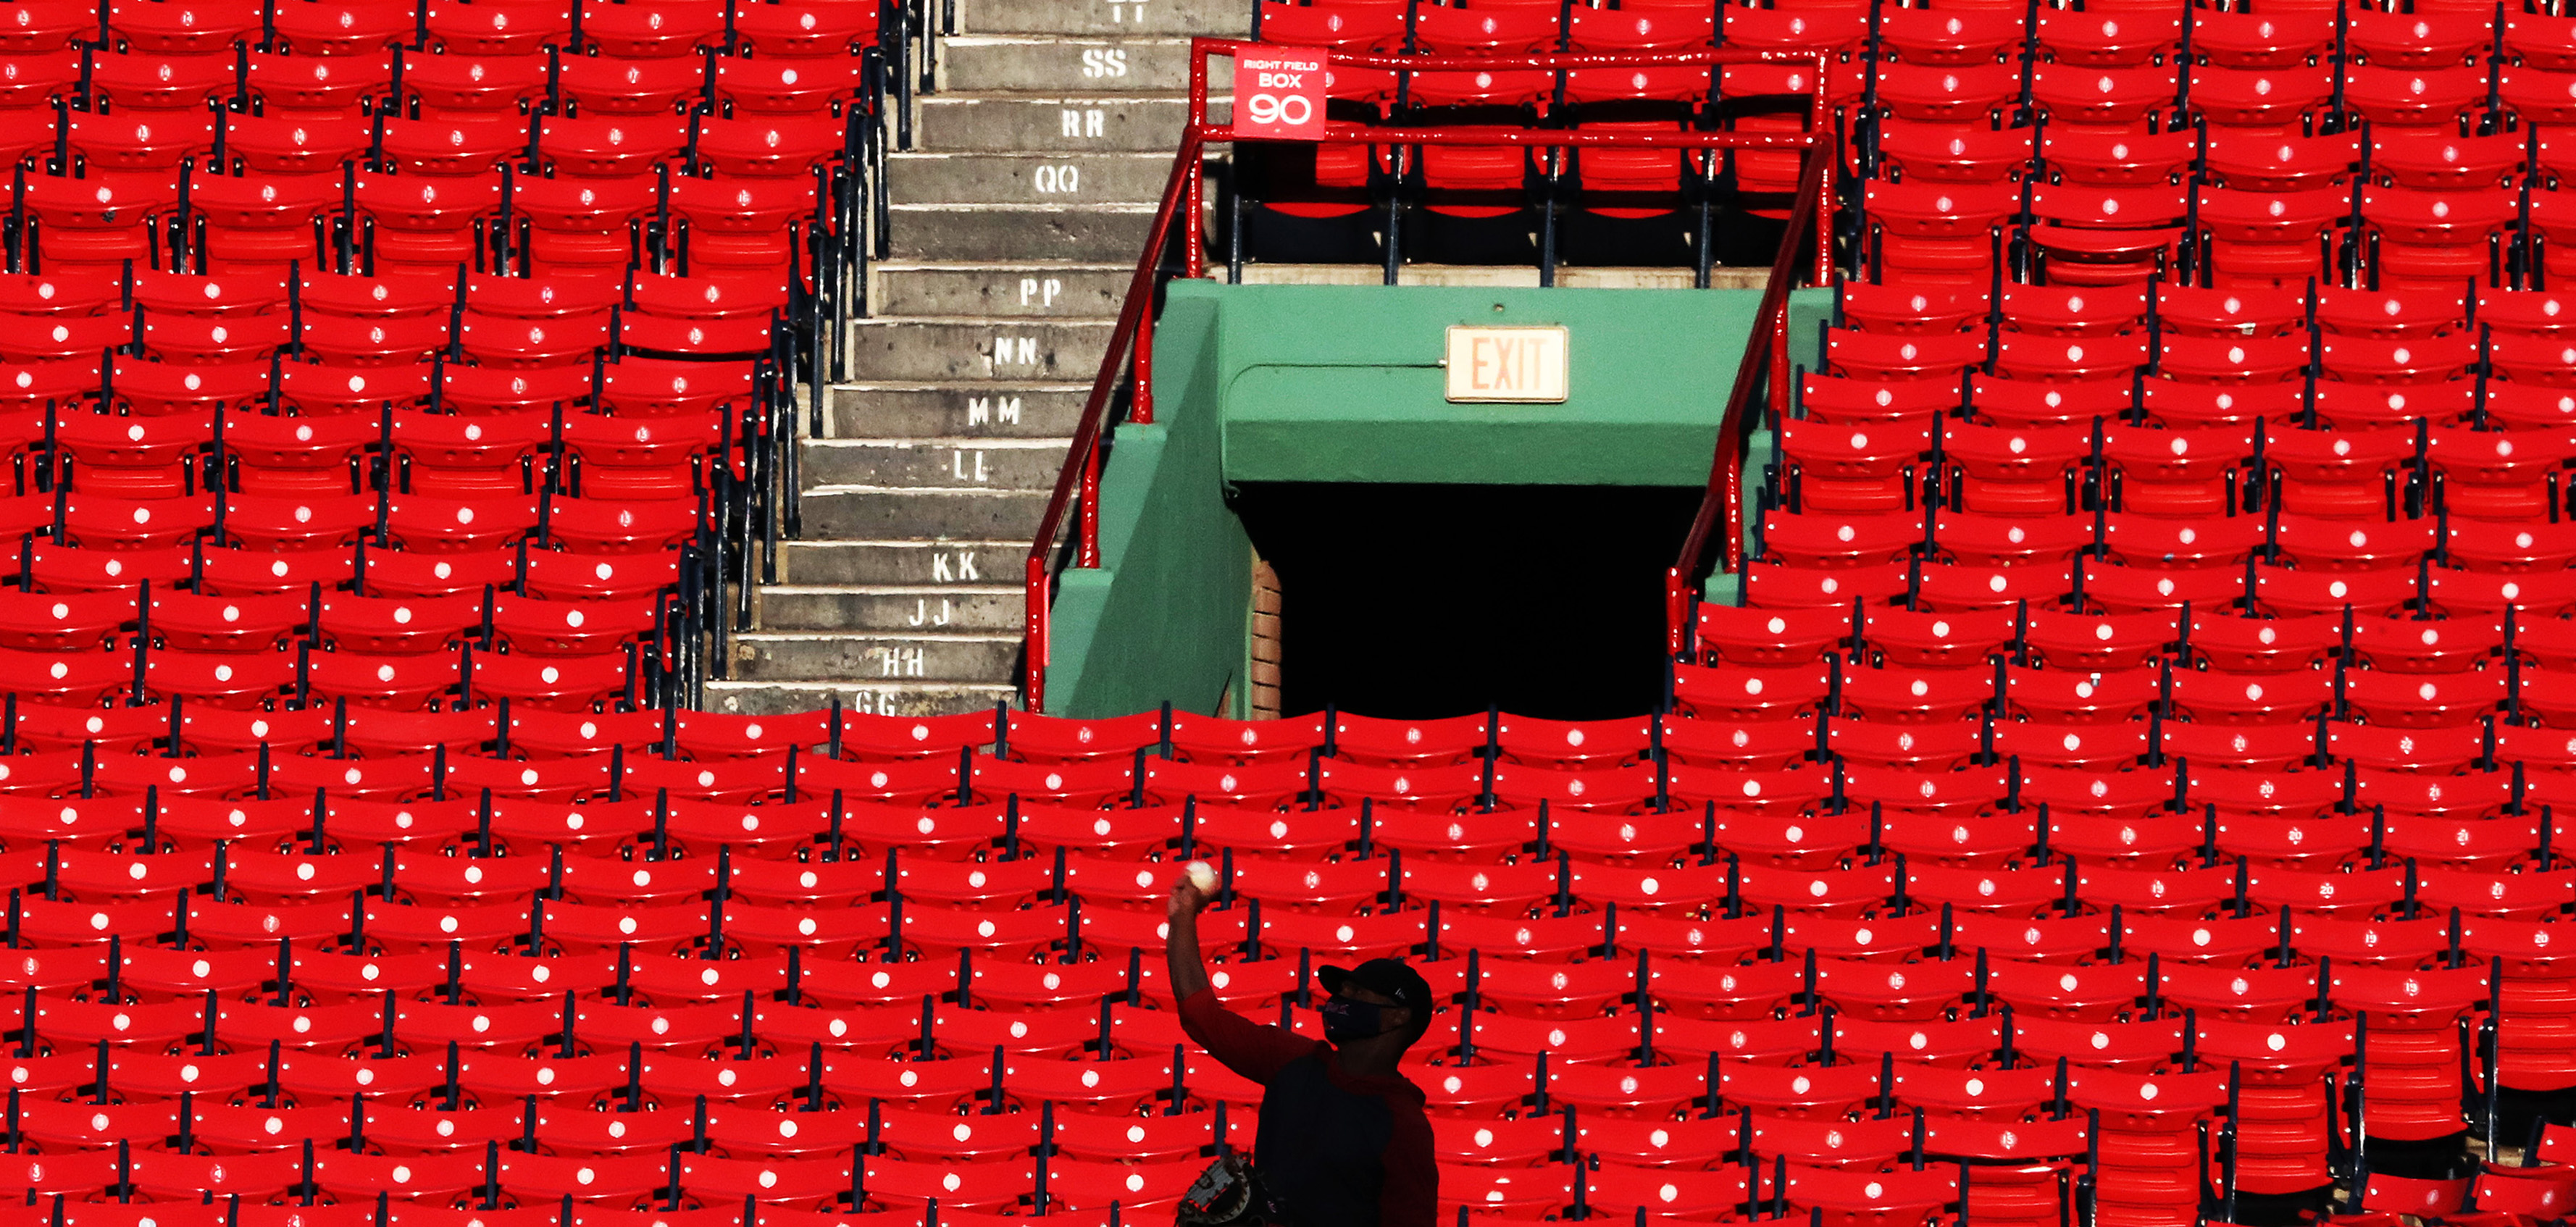 Red Sox leaving 'Golden Tickets' under some Fenway Park seats for